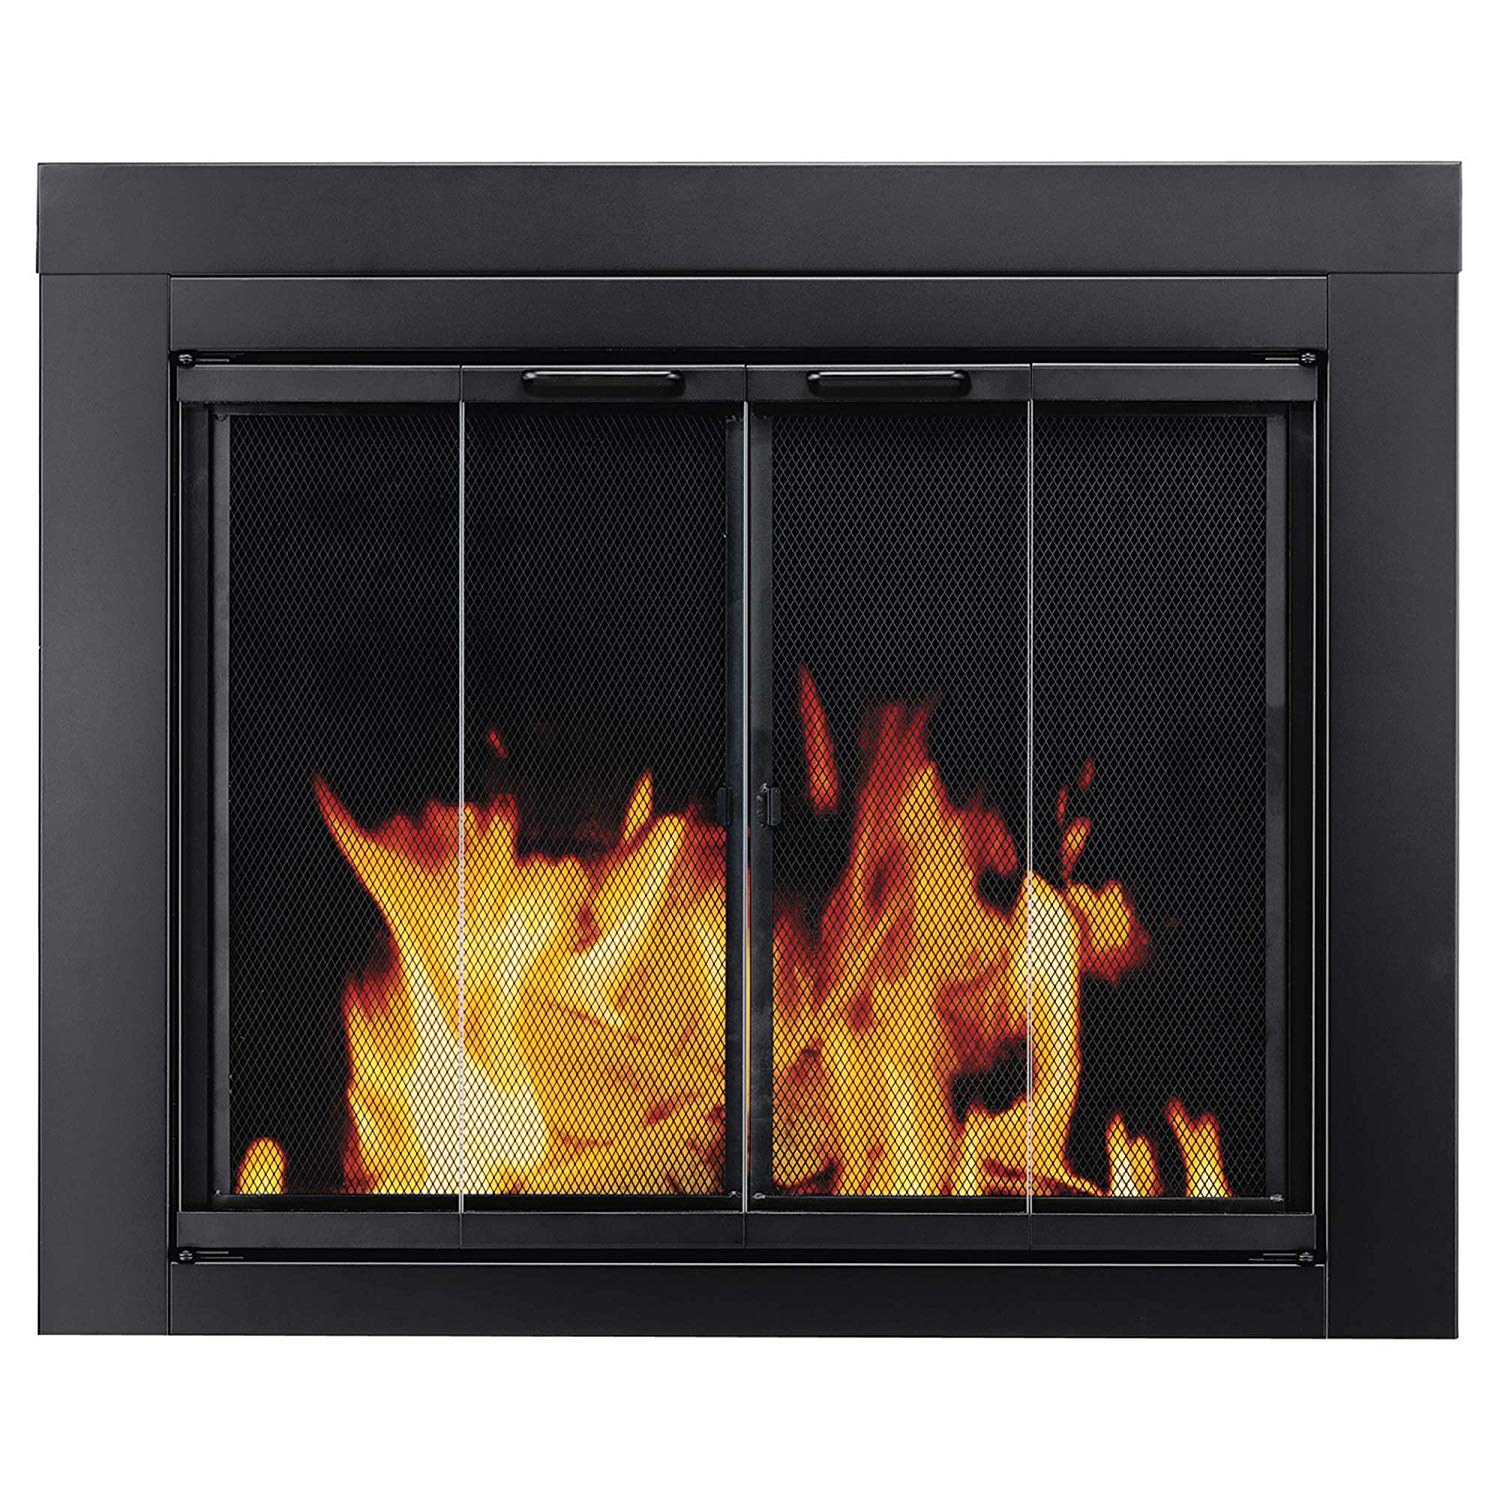 Cast Iron Fireplace Screen Elegant Pleasant Hearth at 1000 ascot Fireplace Glass Door Black Small